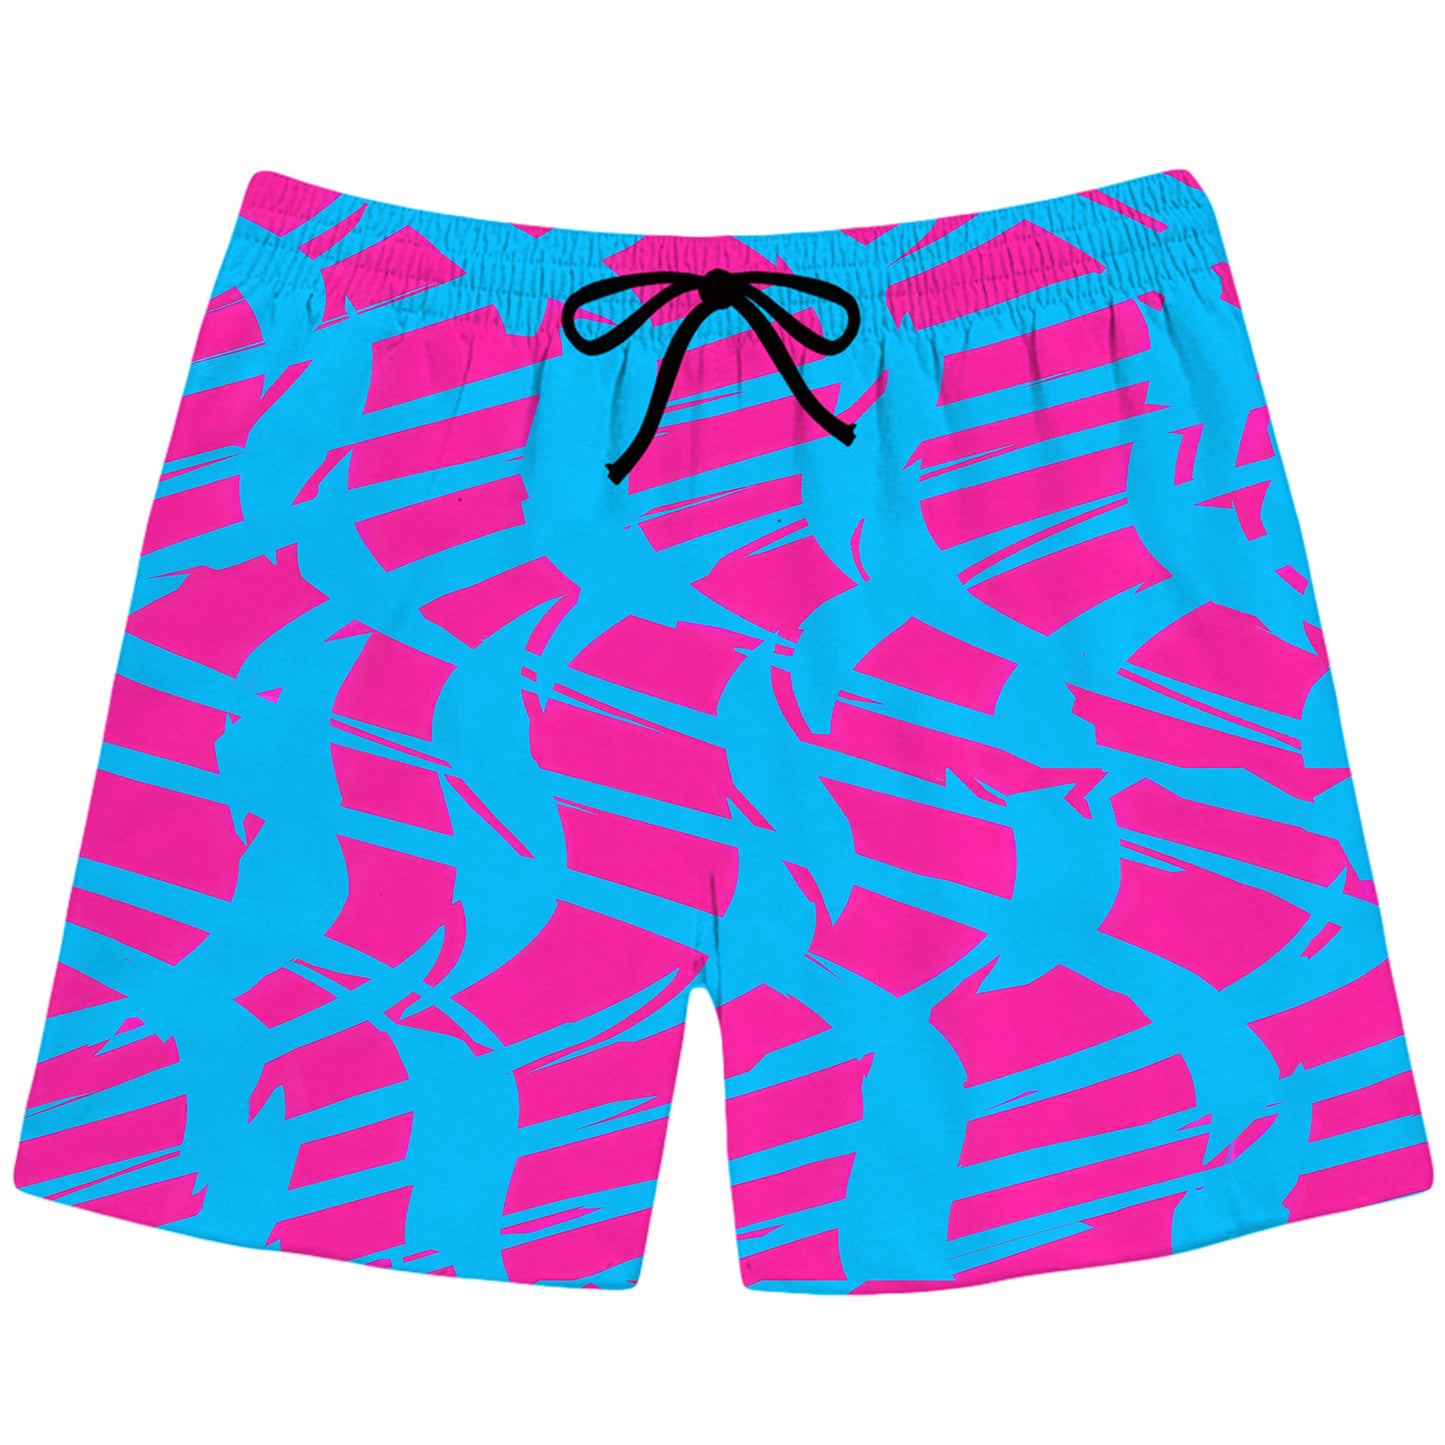 Pink and Blue Squiggly Rave Checkered Swim Trunks, Big Tex Funkadelic, | iEDM